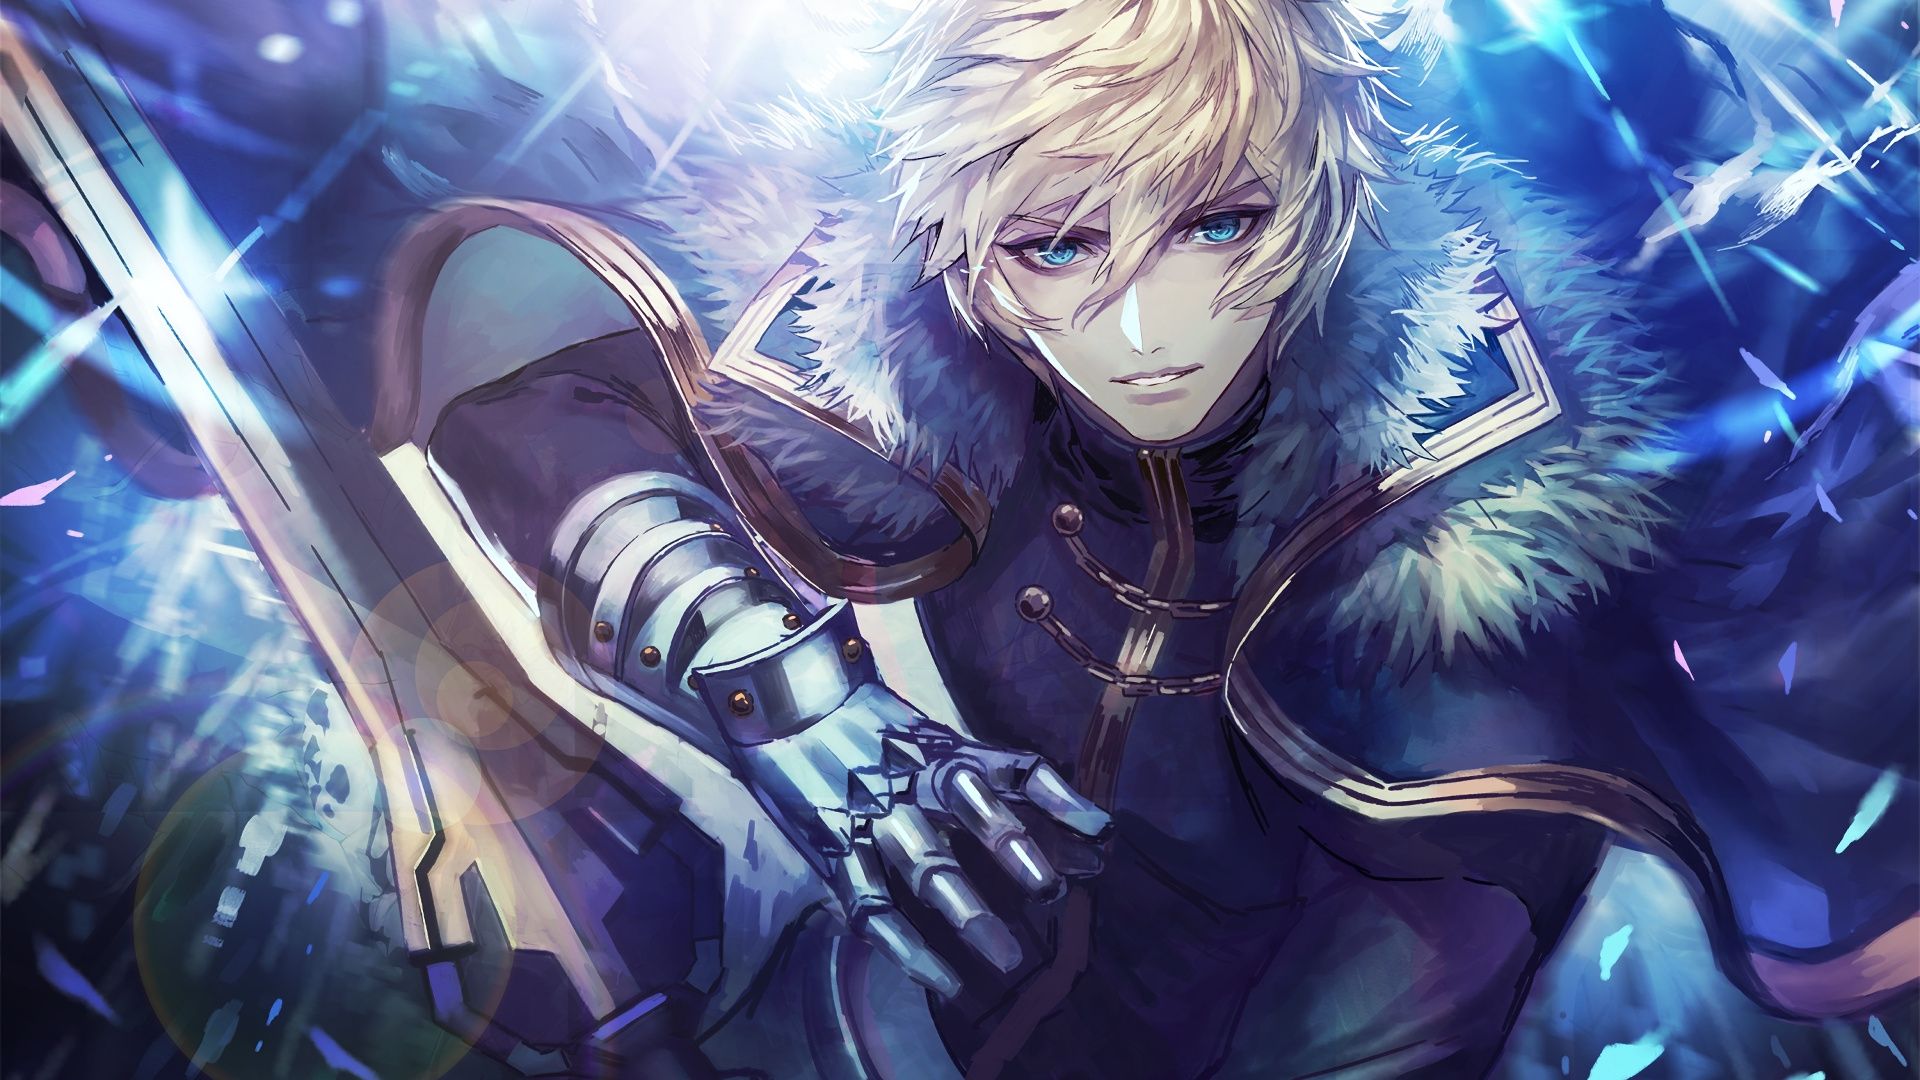 Saber Fate Wallpapers  Top 25 Best Saber Fate Wallpapers  HQ 